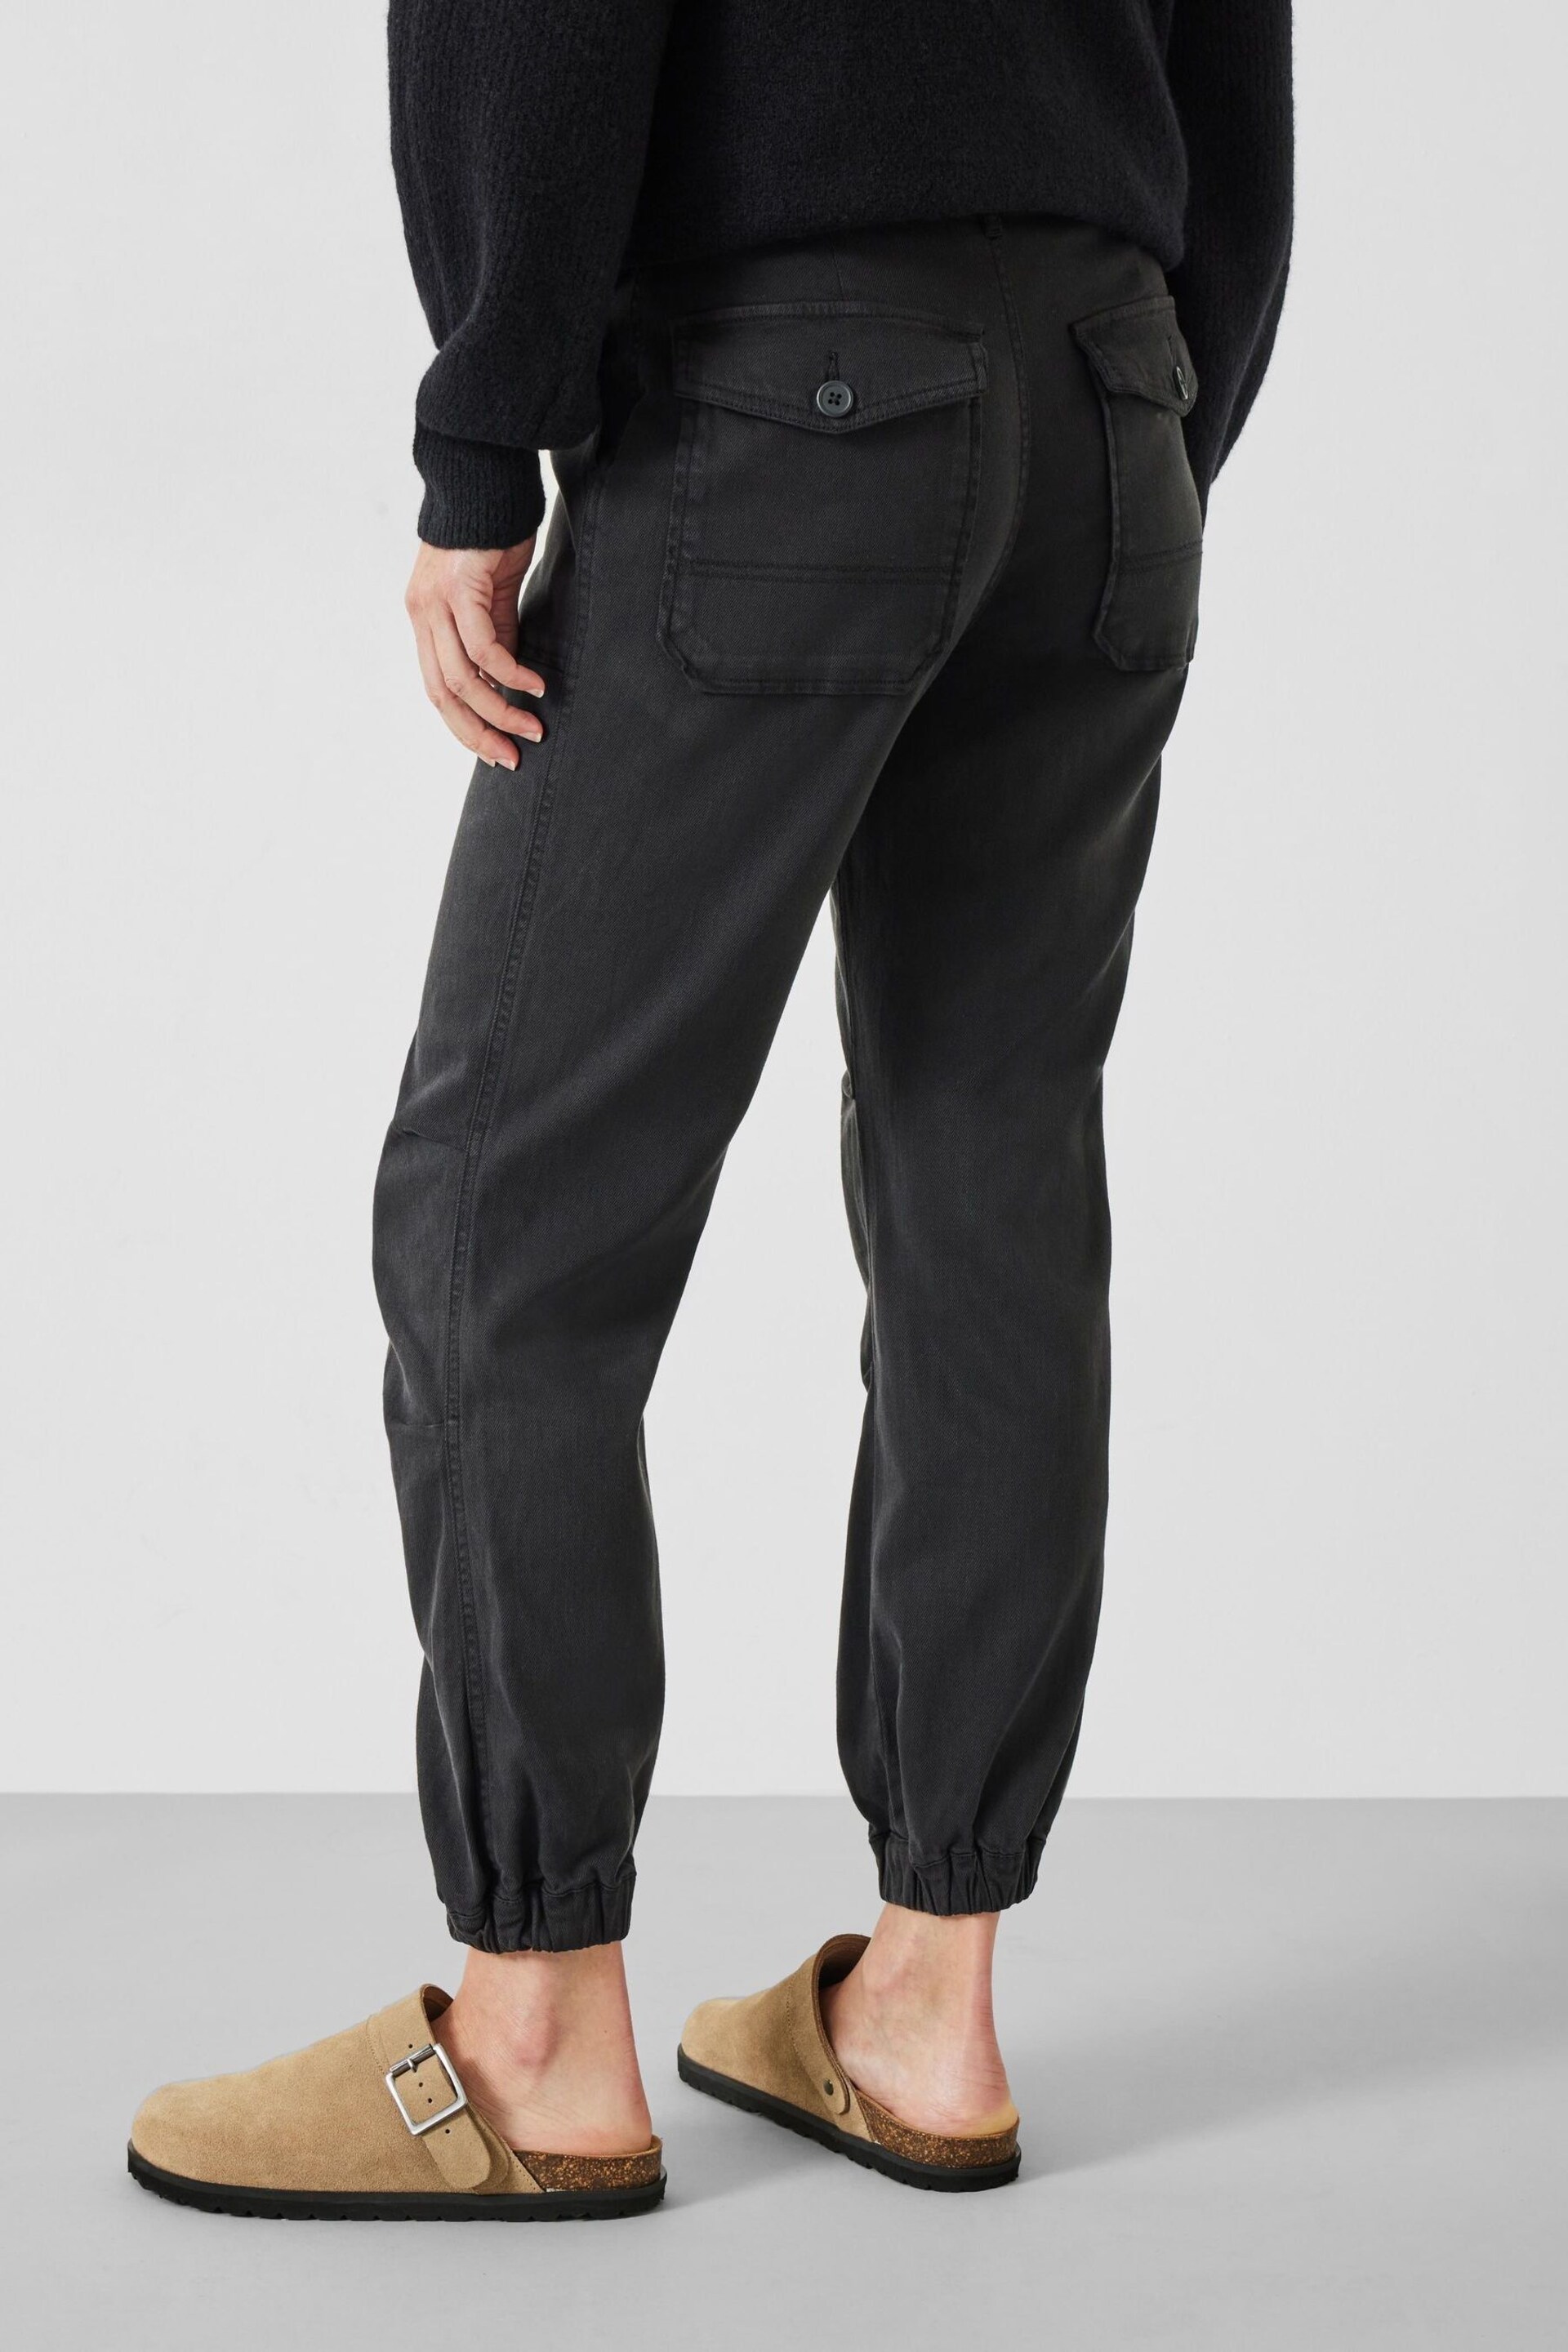 Hush Black Riley Washed Cargo Trousers - Image 2 of 5